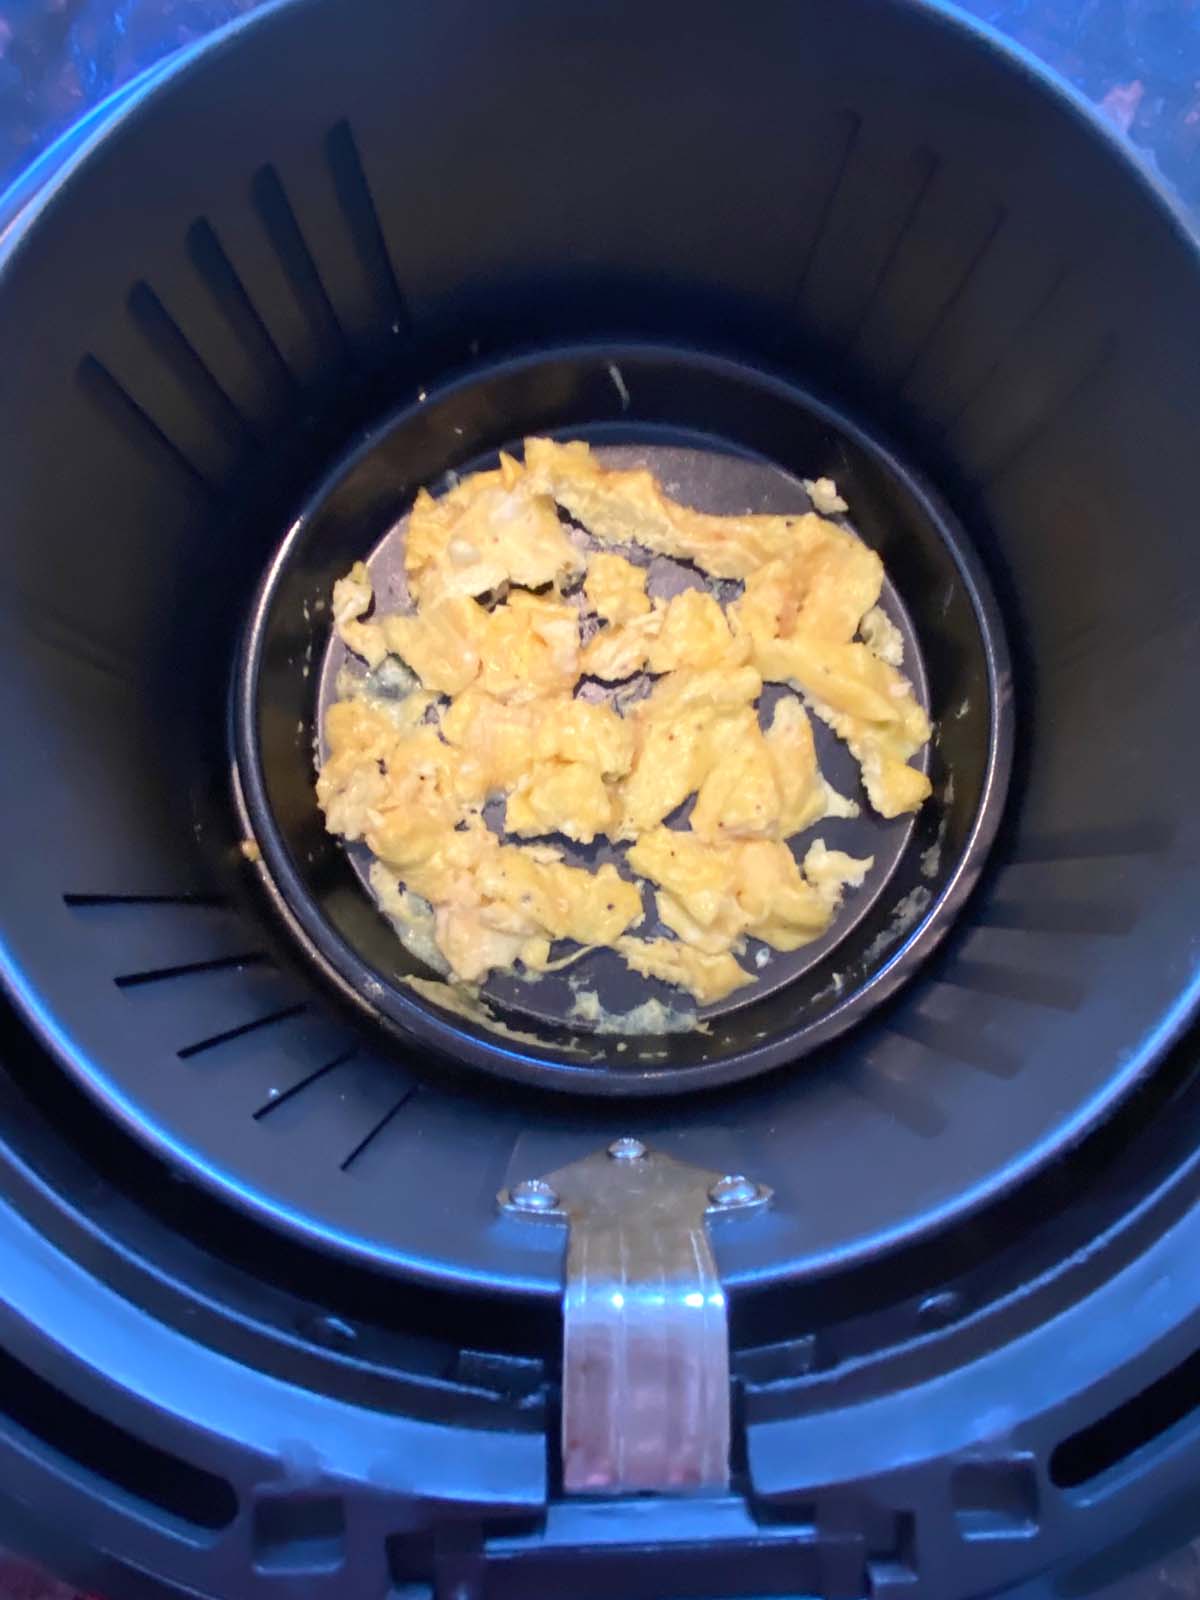 Cooked scrambled eggs in the air fryer.